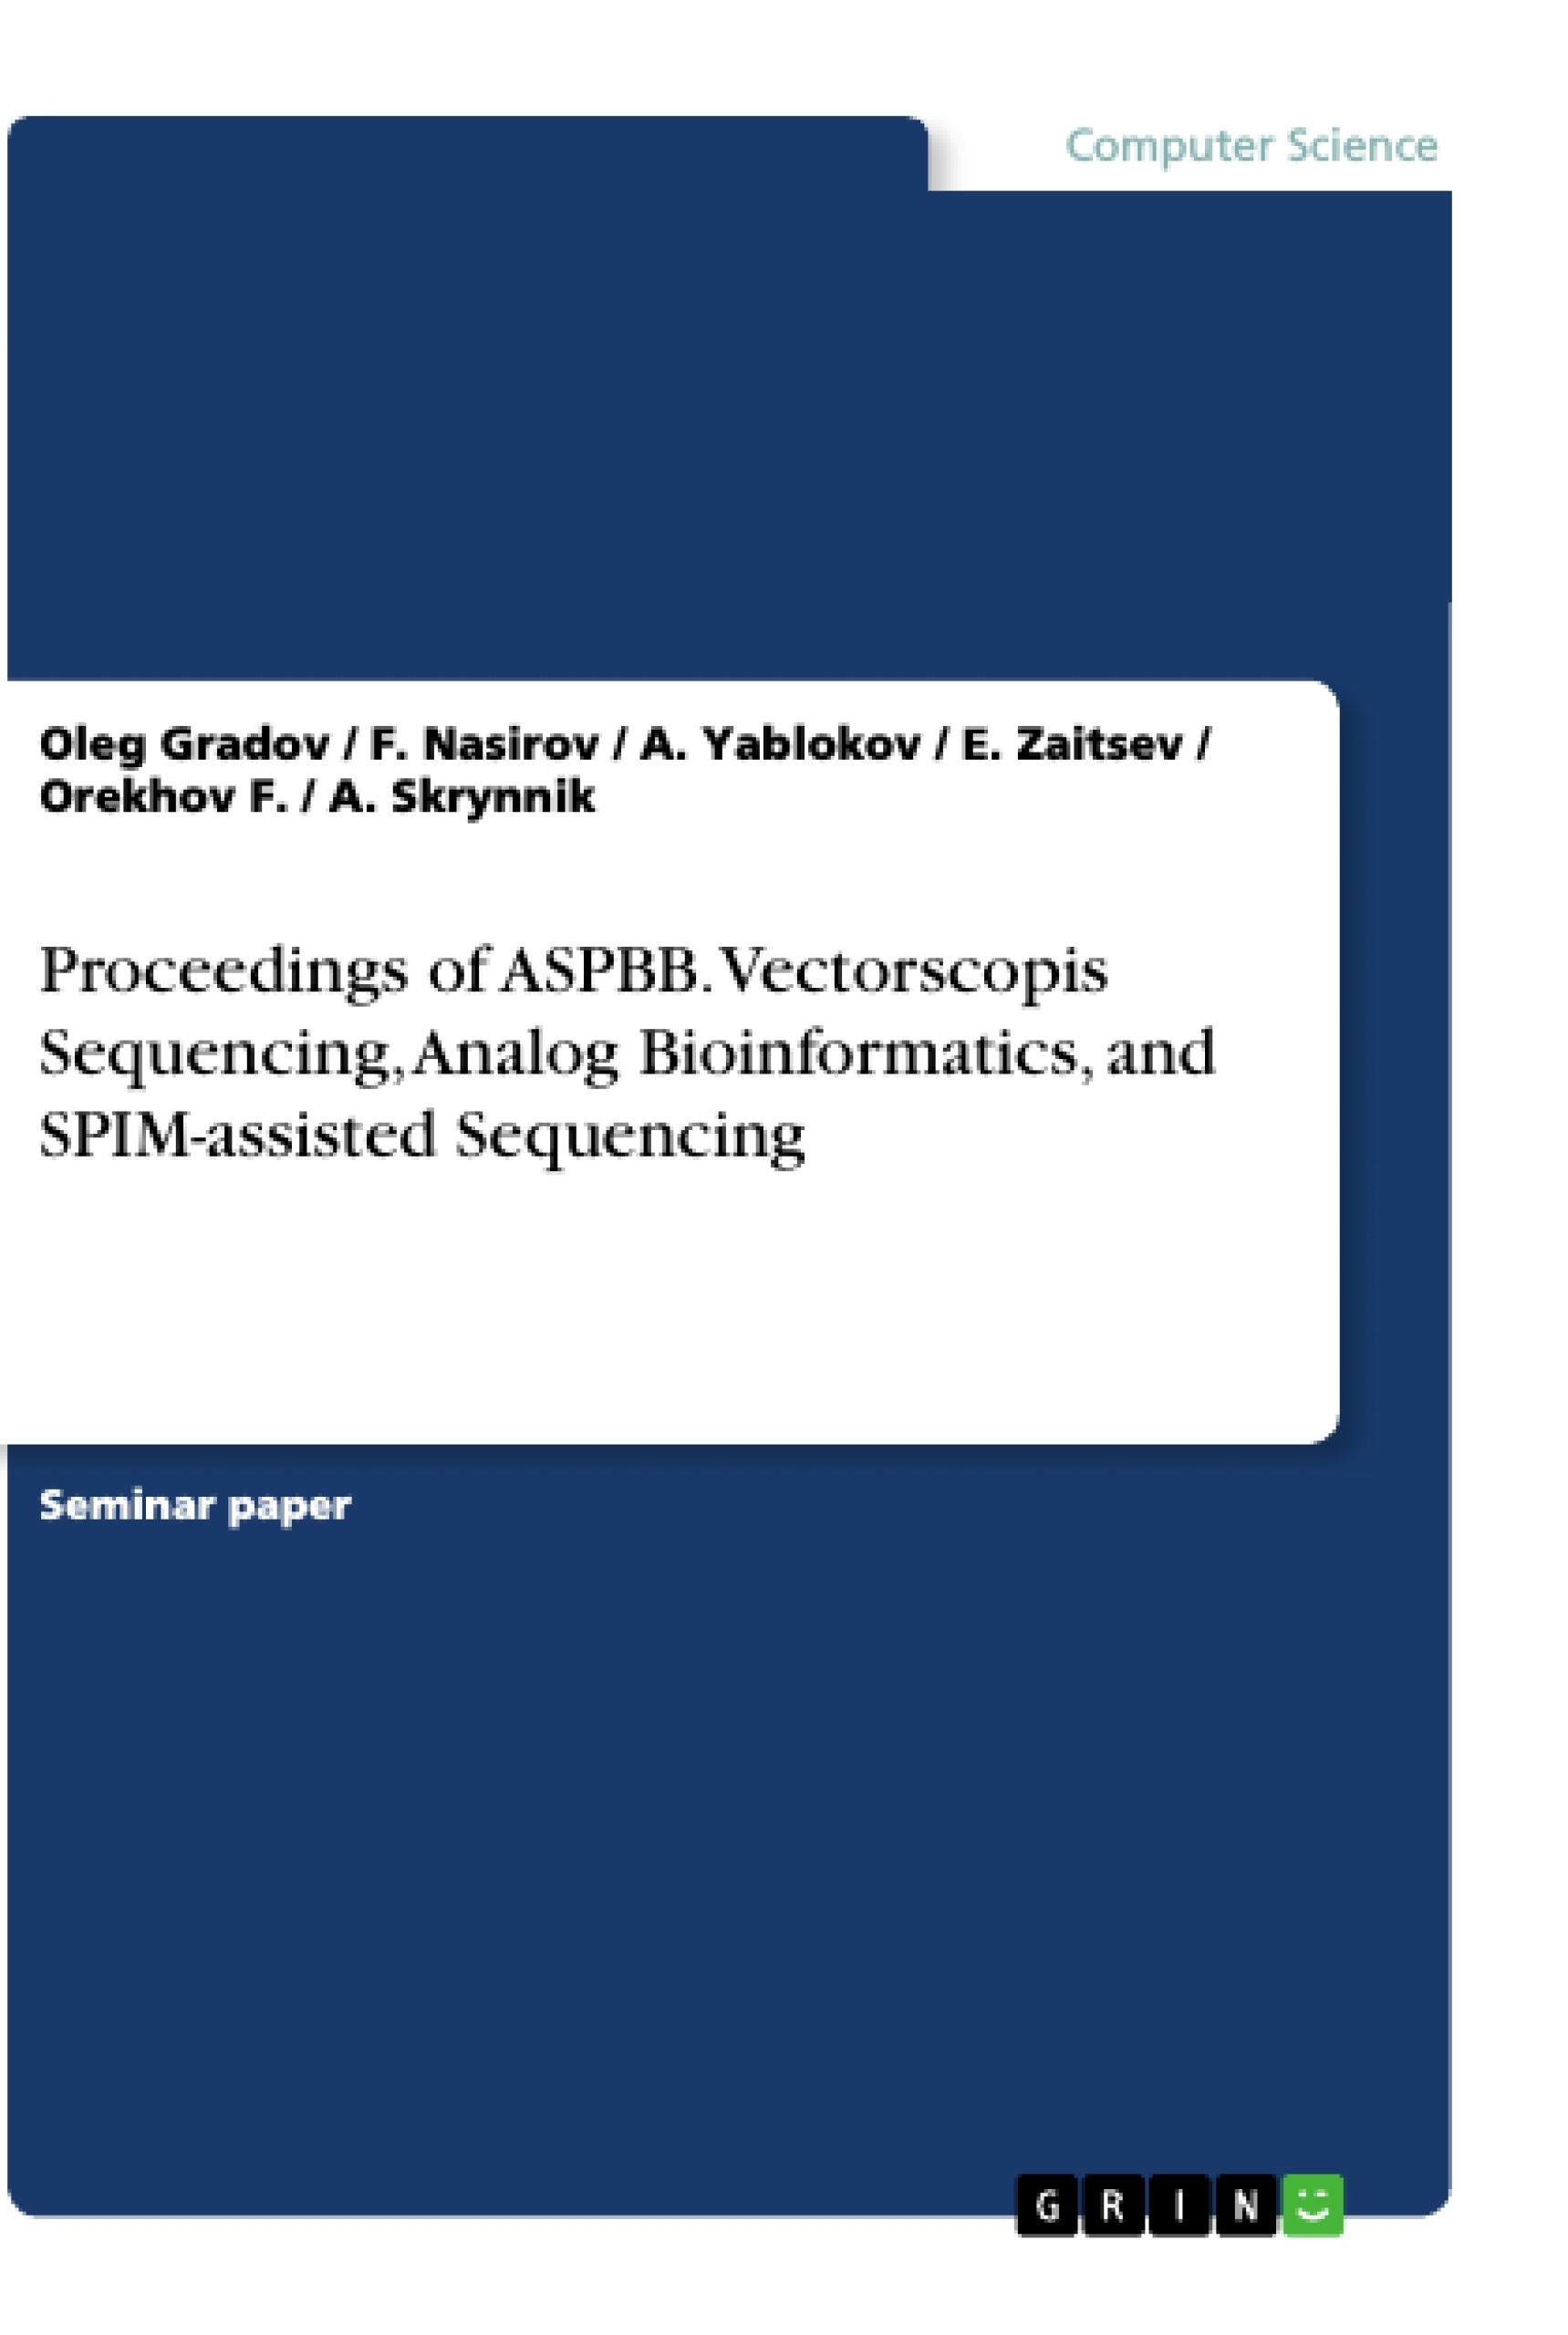 Título: Proceedings of ASPBB. Vectorscopis Sequencing,  Analog Bioinformatics, and SPIM-assisted Sequencing